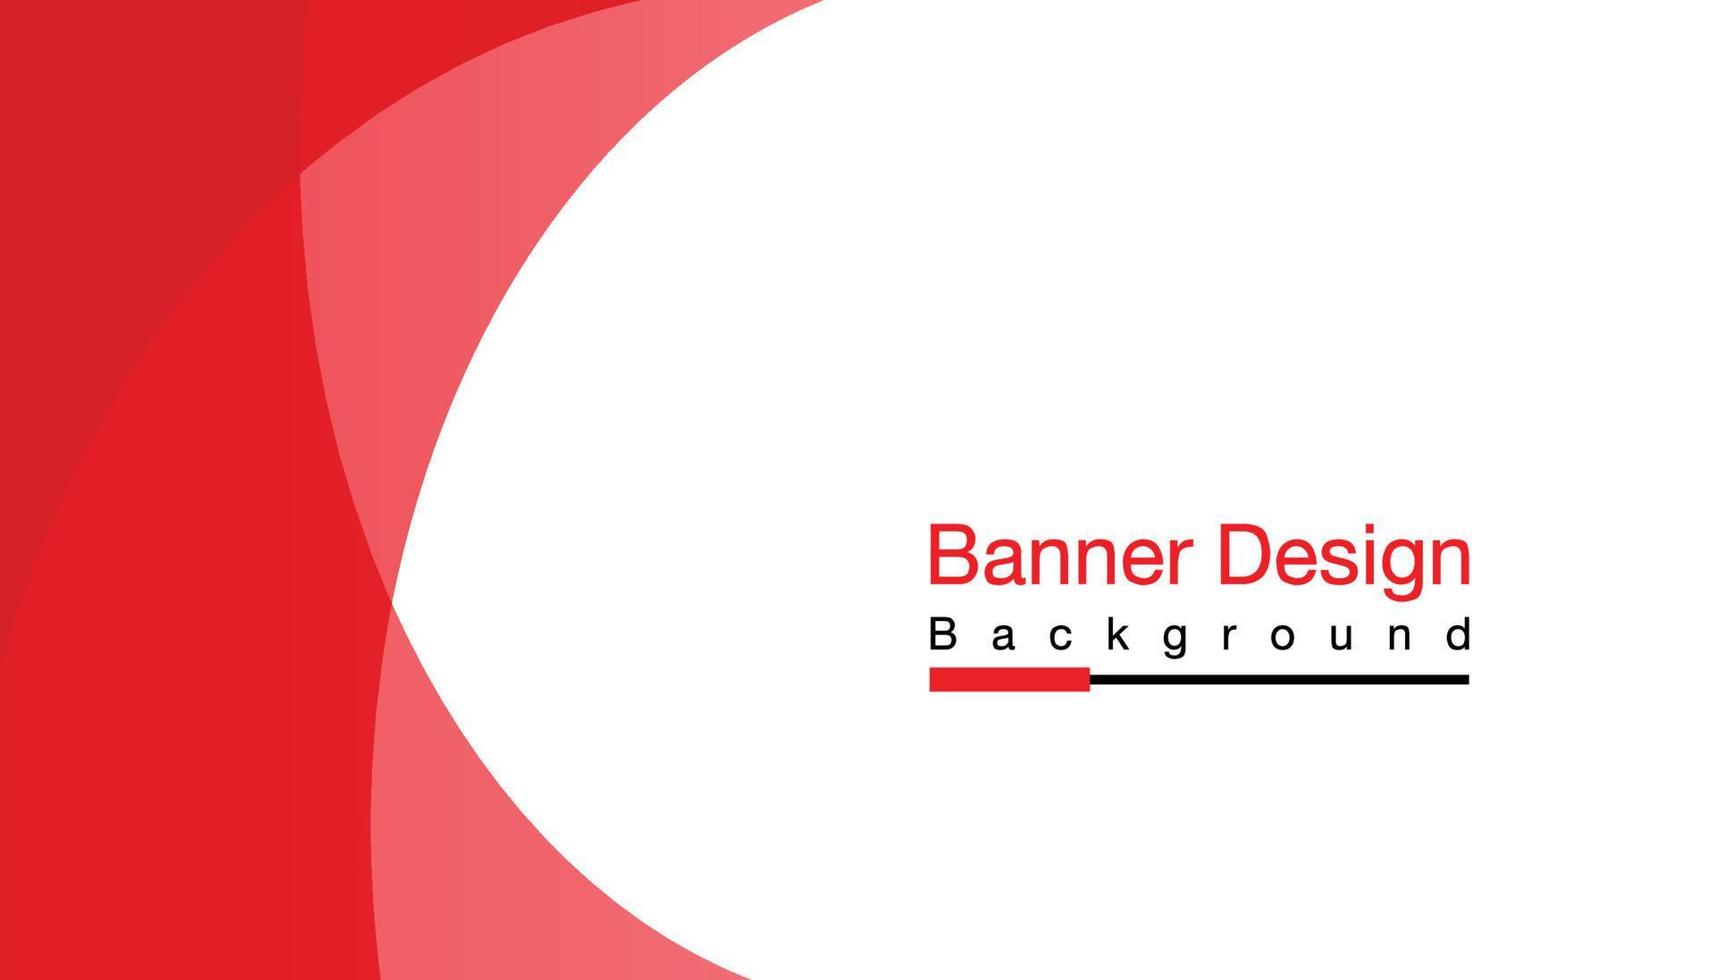 Red background vector illustration lighting effect graphic for text and message board design infographic.